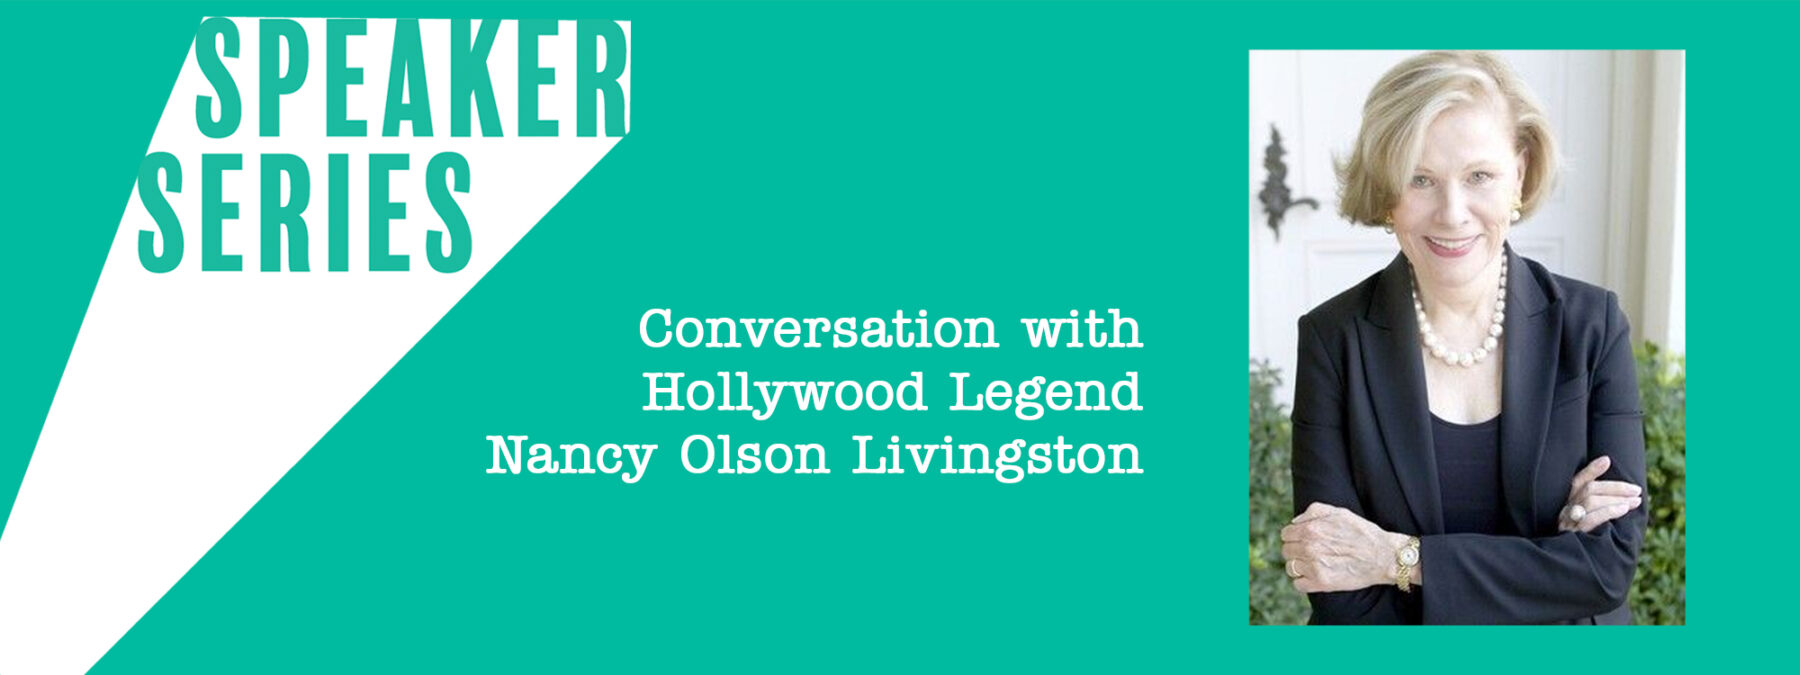 Conversation with Hollywood Legend Nancy Olson Livingston